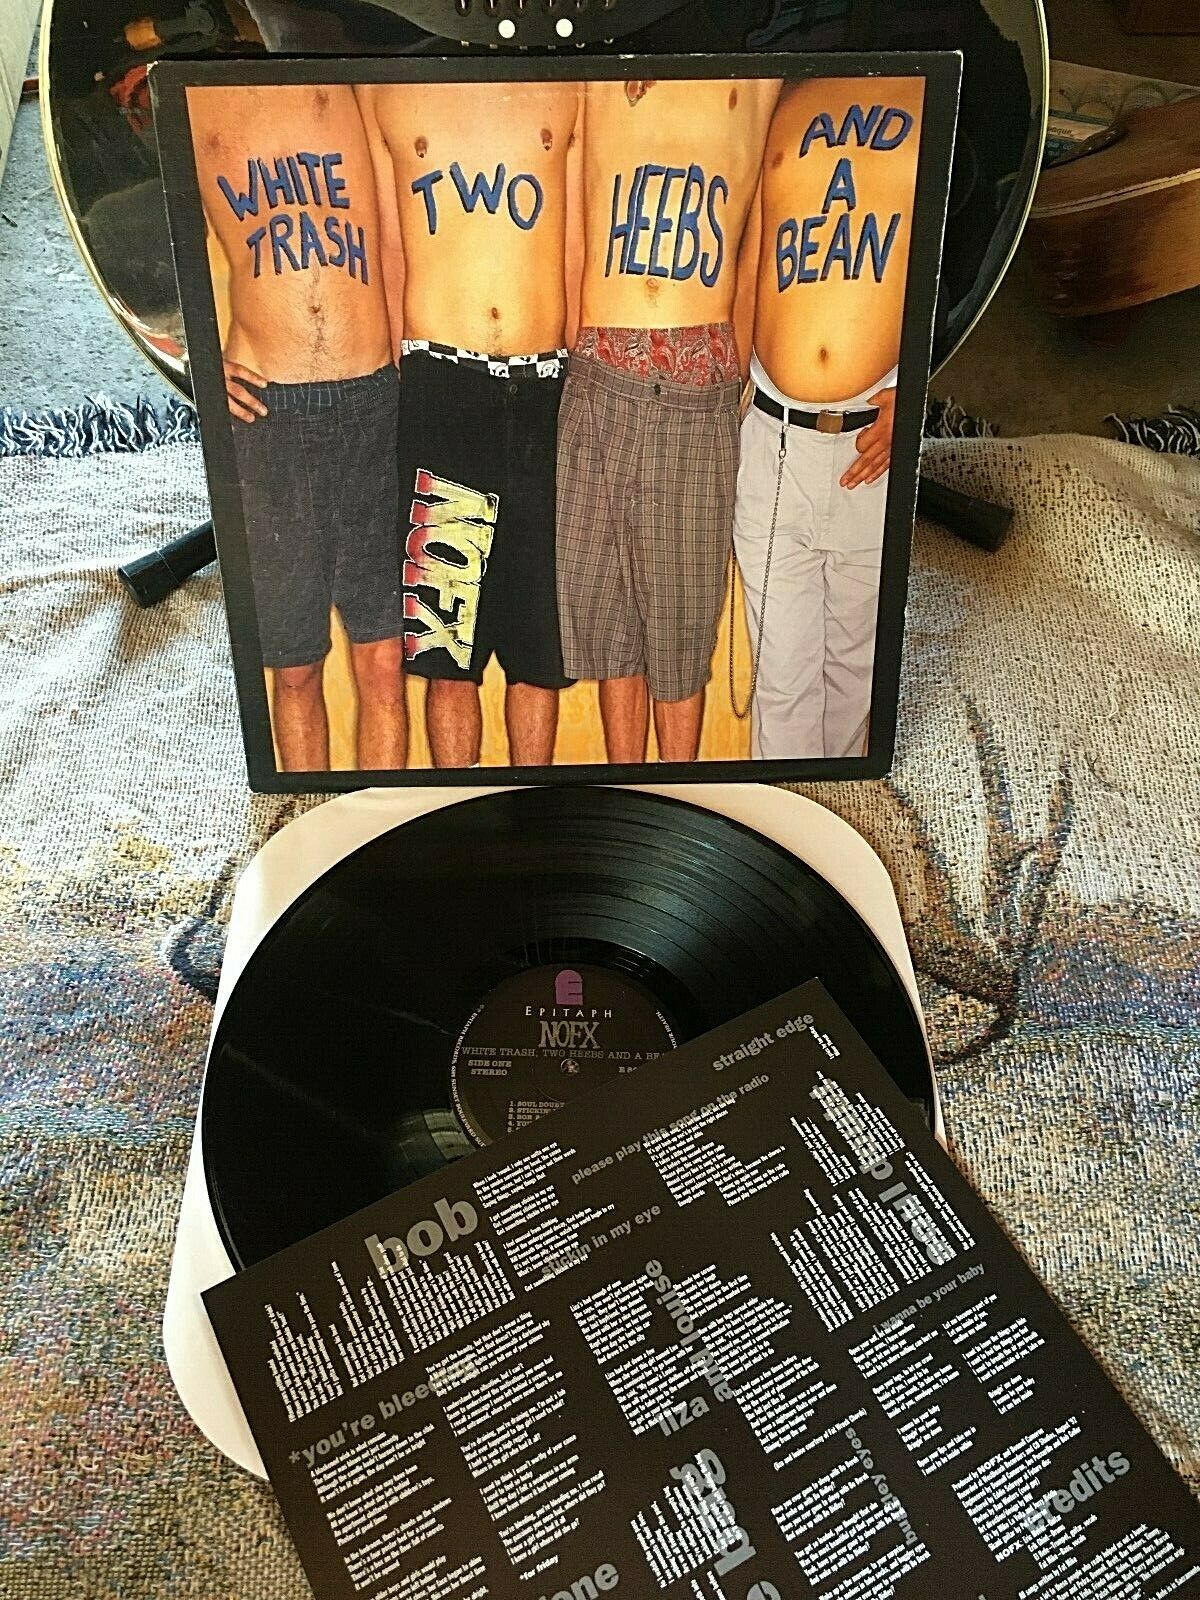 popsike.com - NOFX VINYL white trash two heebs and a bean LP PUNK